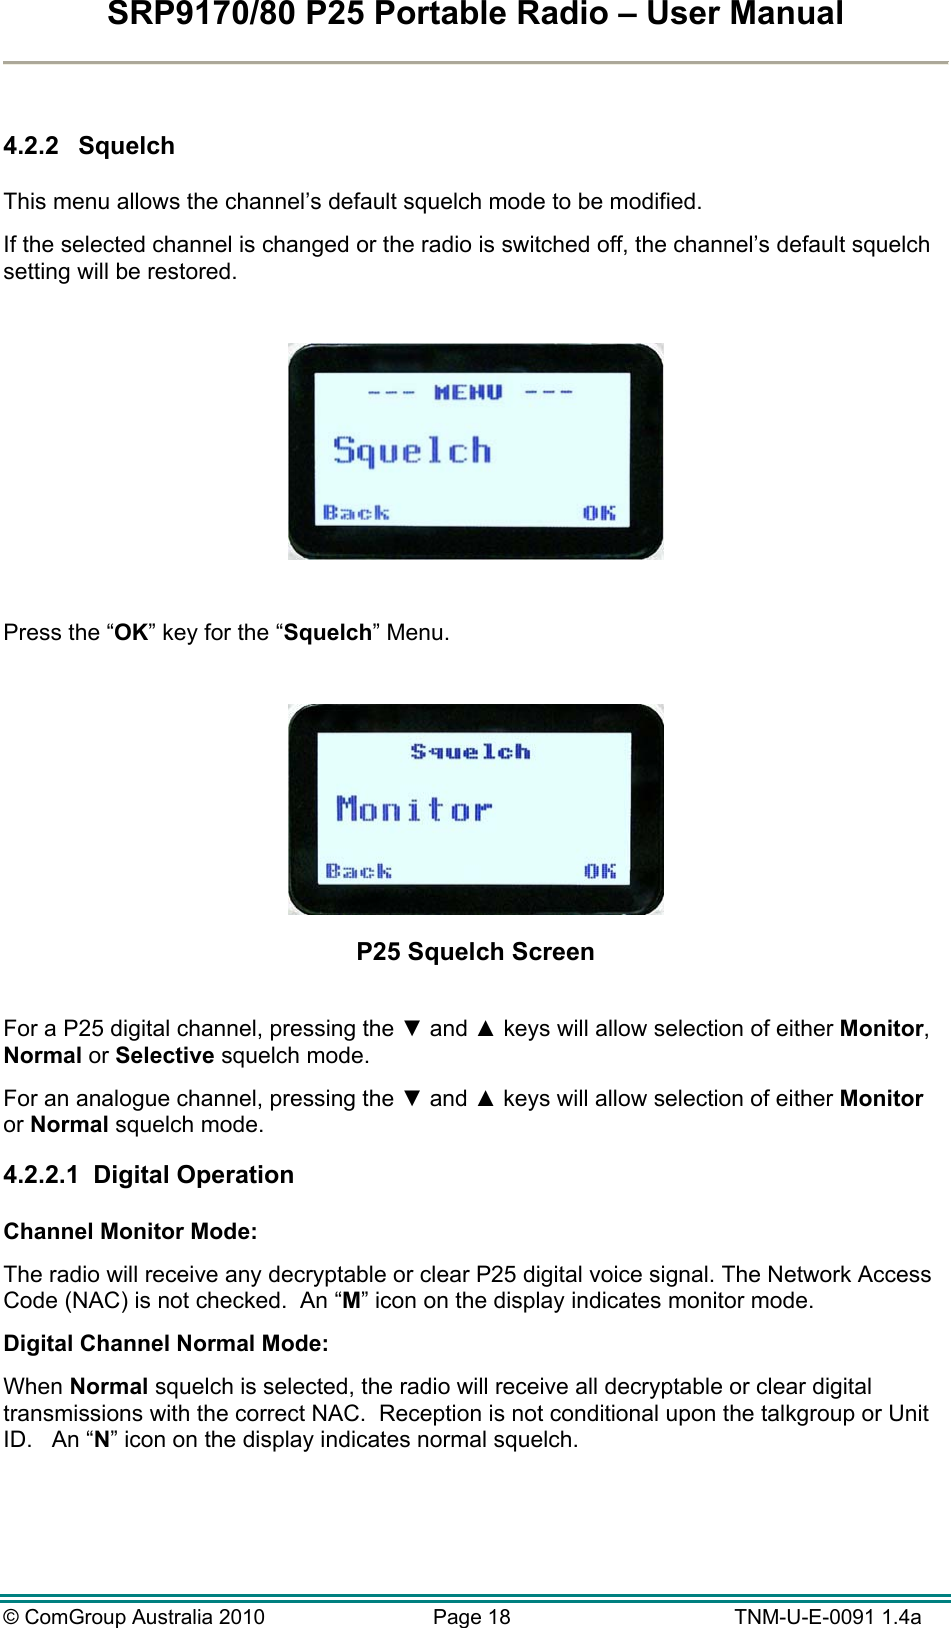 SRP9170/80 P25 Portable Radio – User Manual  © ComGroup Australia 2010  Page 18   TNM-U-E-0091 1.4a  4.2.2 Squelch  This menu allows the channel’s default squelch mode to be modified. If the selected channel is changed or the radio is switched off, the channel’s default squelch setting will be restored.    Press the “OK” key for the “Squelch” Menu.   P25 Squelch Screen  For a P25 digital channel, pressing the ▼ and ▲ keys will allow selection of either Monitor, Normal or Selective squelch mode.   For an analogue channel, pressing the ▼ and ▲ keys will allow selection of either Monitor or Normal squelch mode.   4.2.2.1 Digital Operation  Channel Monitor Mode:   The radio will receive any decryptable or clear P25 digital voice signal. The Network Access Code (NAC) is not checked.  An “M” icon on the display indicates monitor mode. Digital Channel Normal Mode: When Normal squelch is selected, the radio will receive all decryptable or clear digital transmissions with the correct NAC.  Reception is not conditional upon the talkgroup or Unit ID.   An “N” icon on the display indicates normal squelch.   